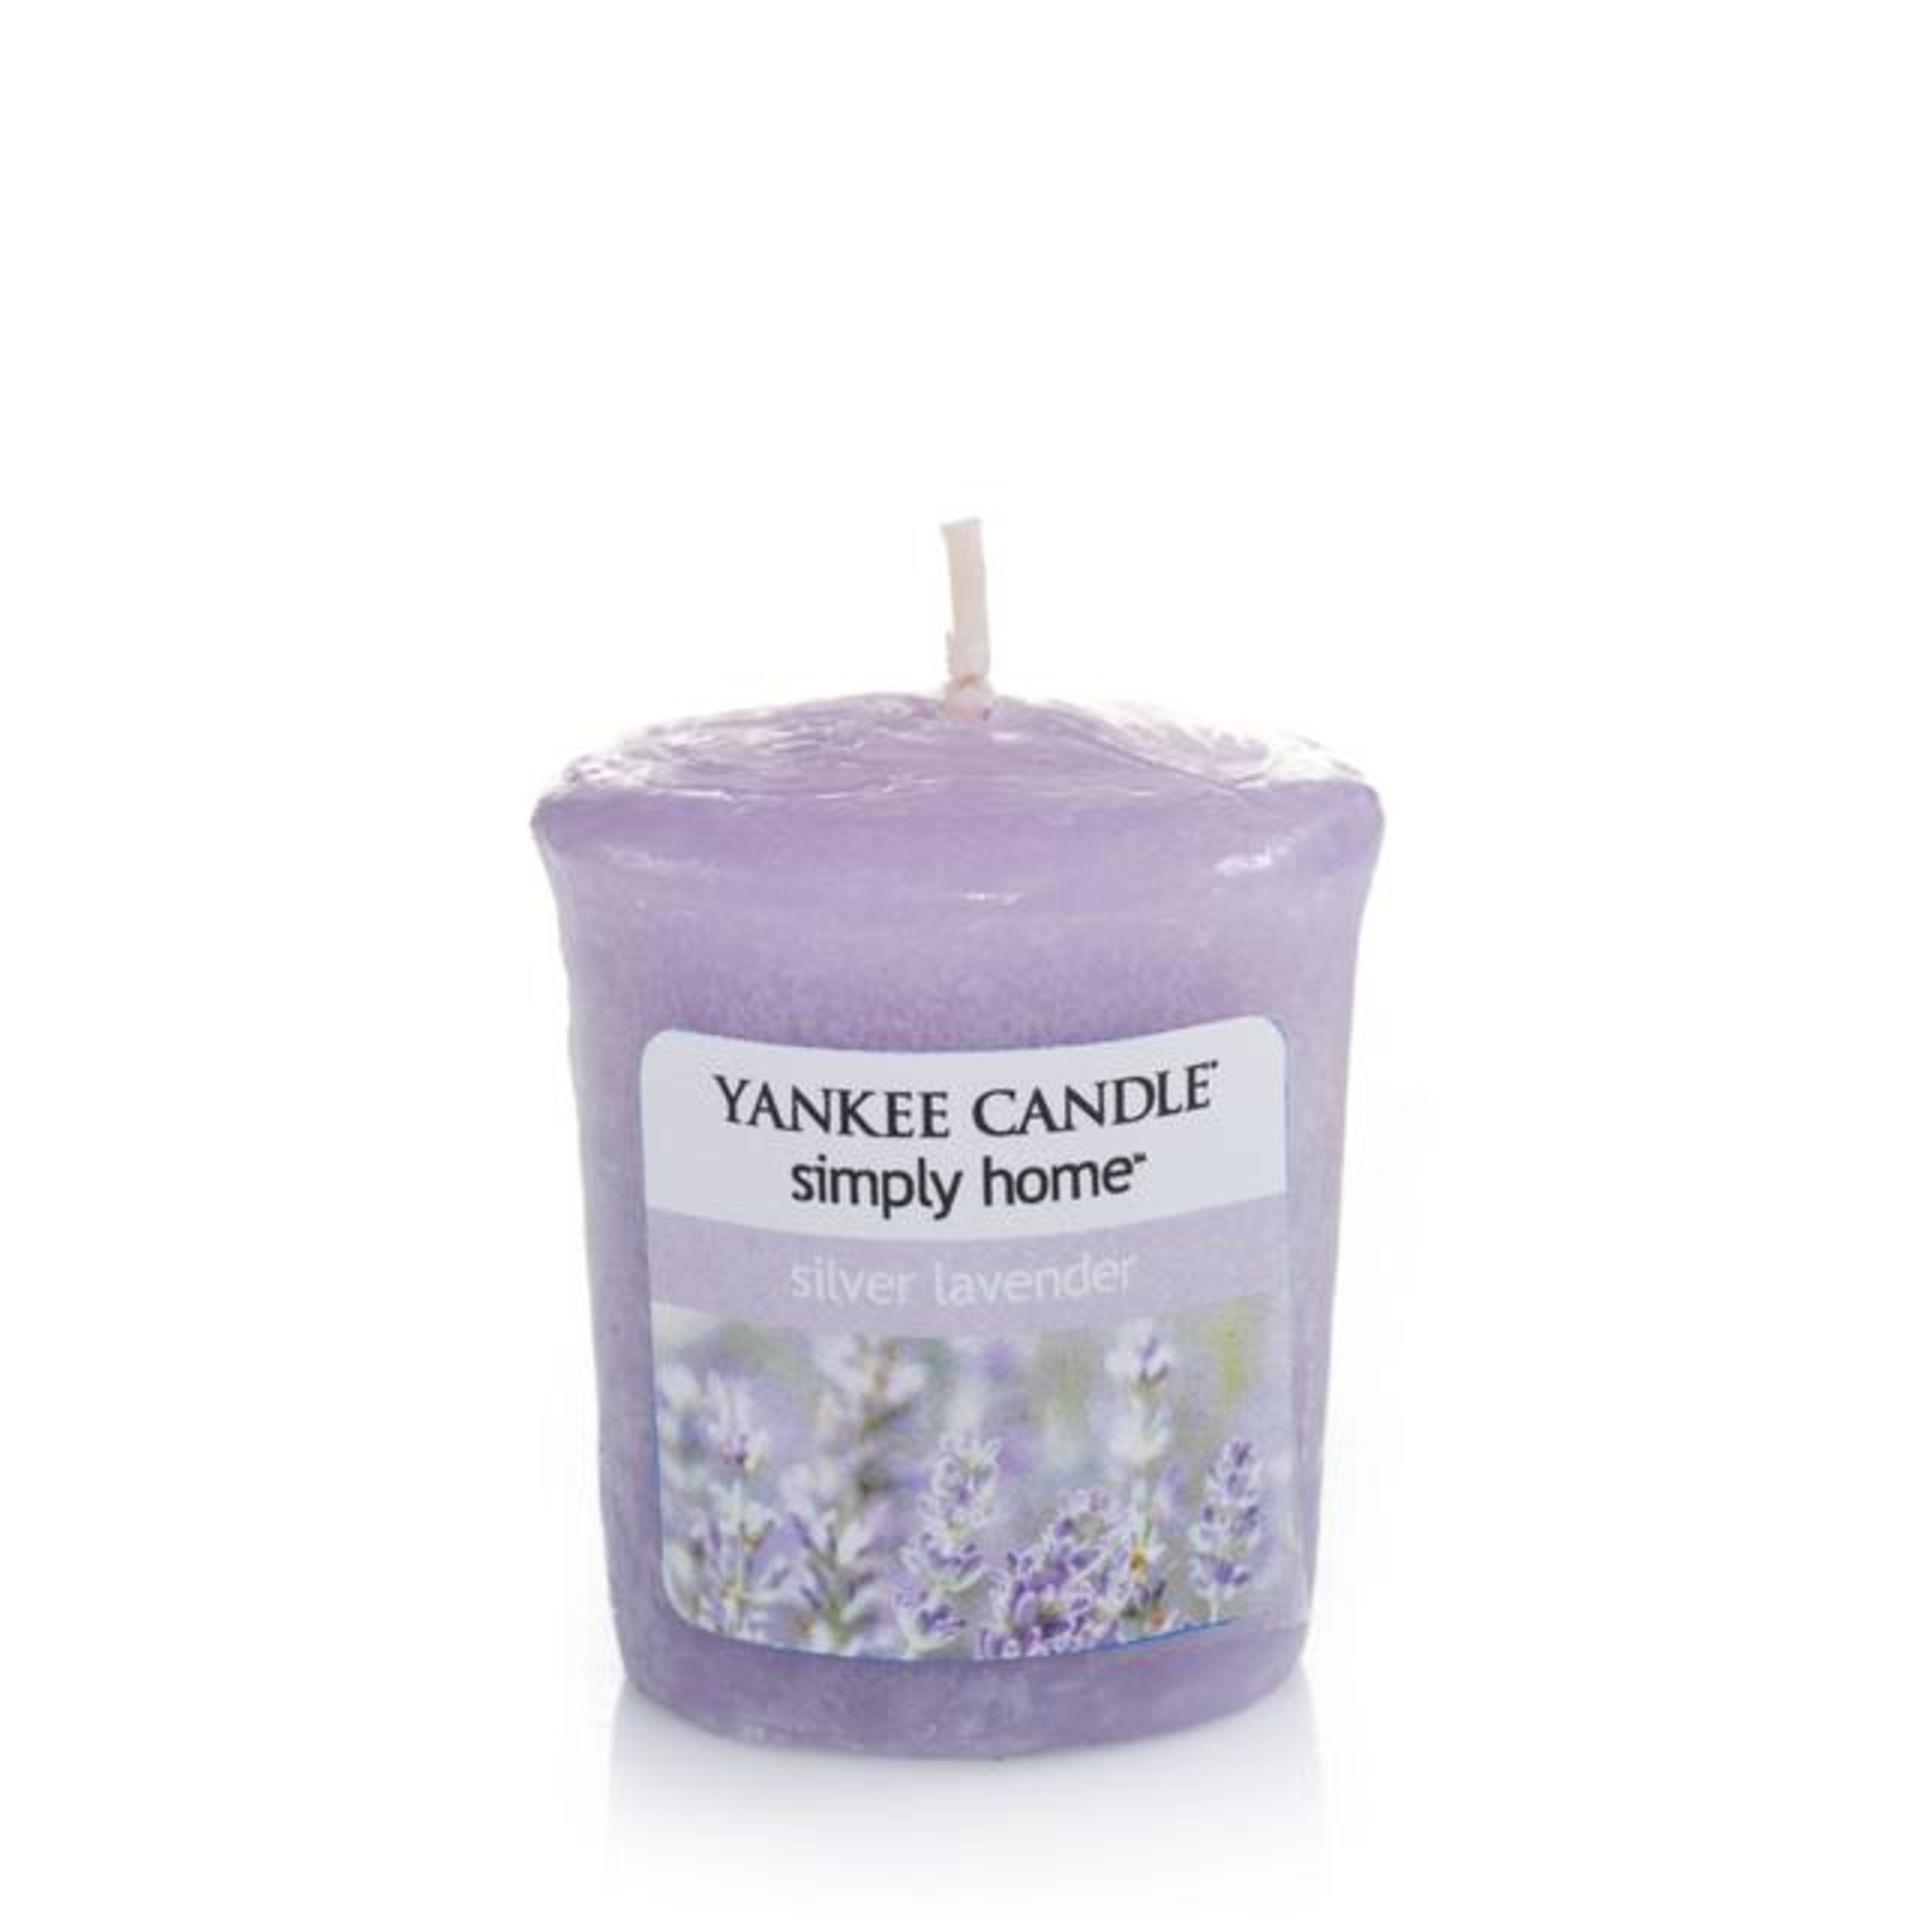 V Brand New 18 x Yankee Candle Votive Silver Lavender 49g Total Amazon Price £71.82 X 2 YOUR BID - Image 2 of 2